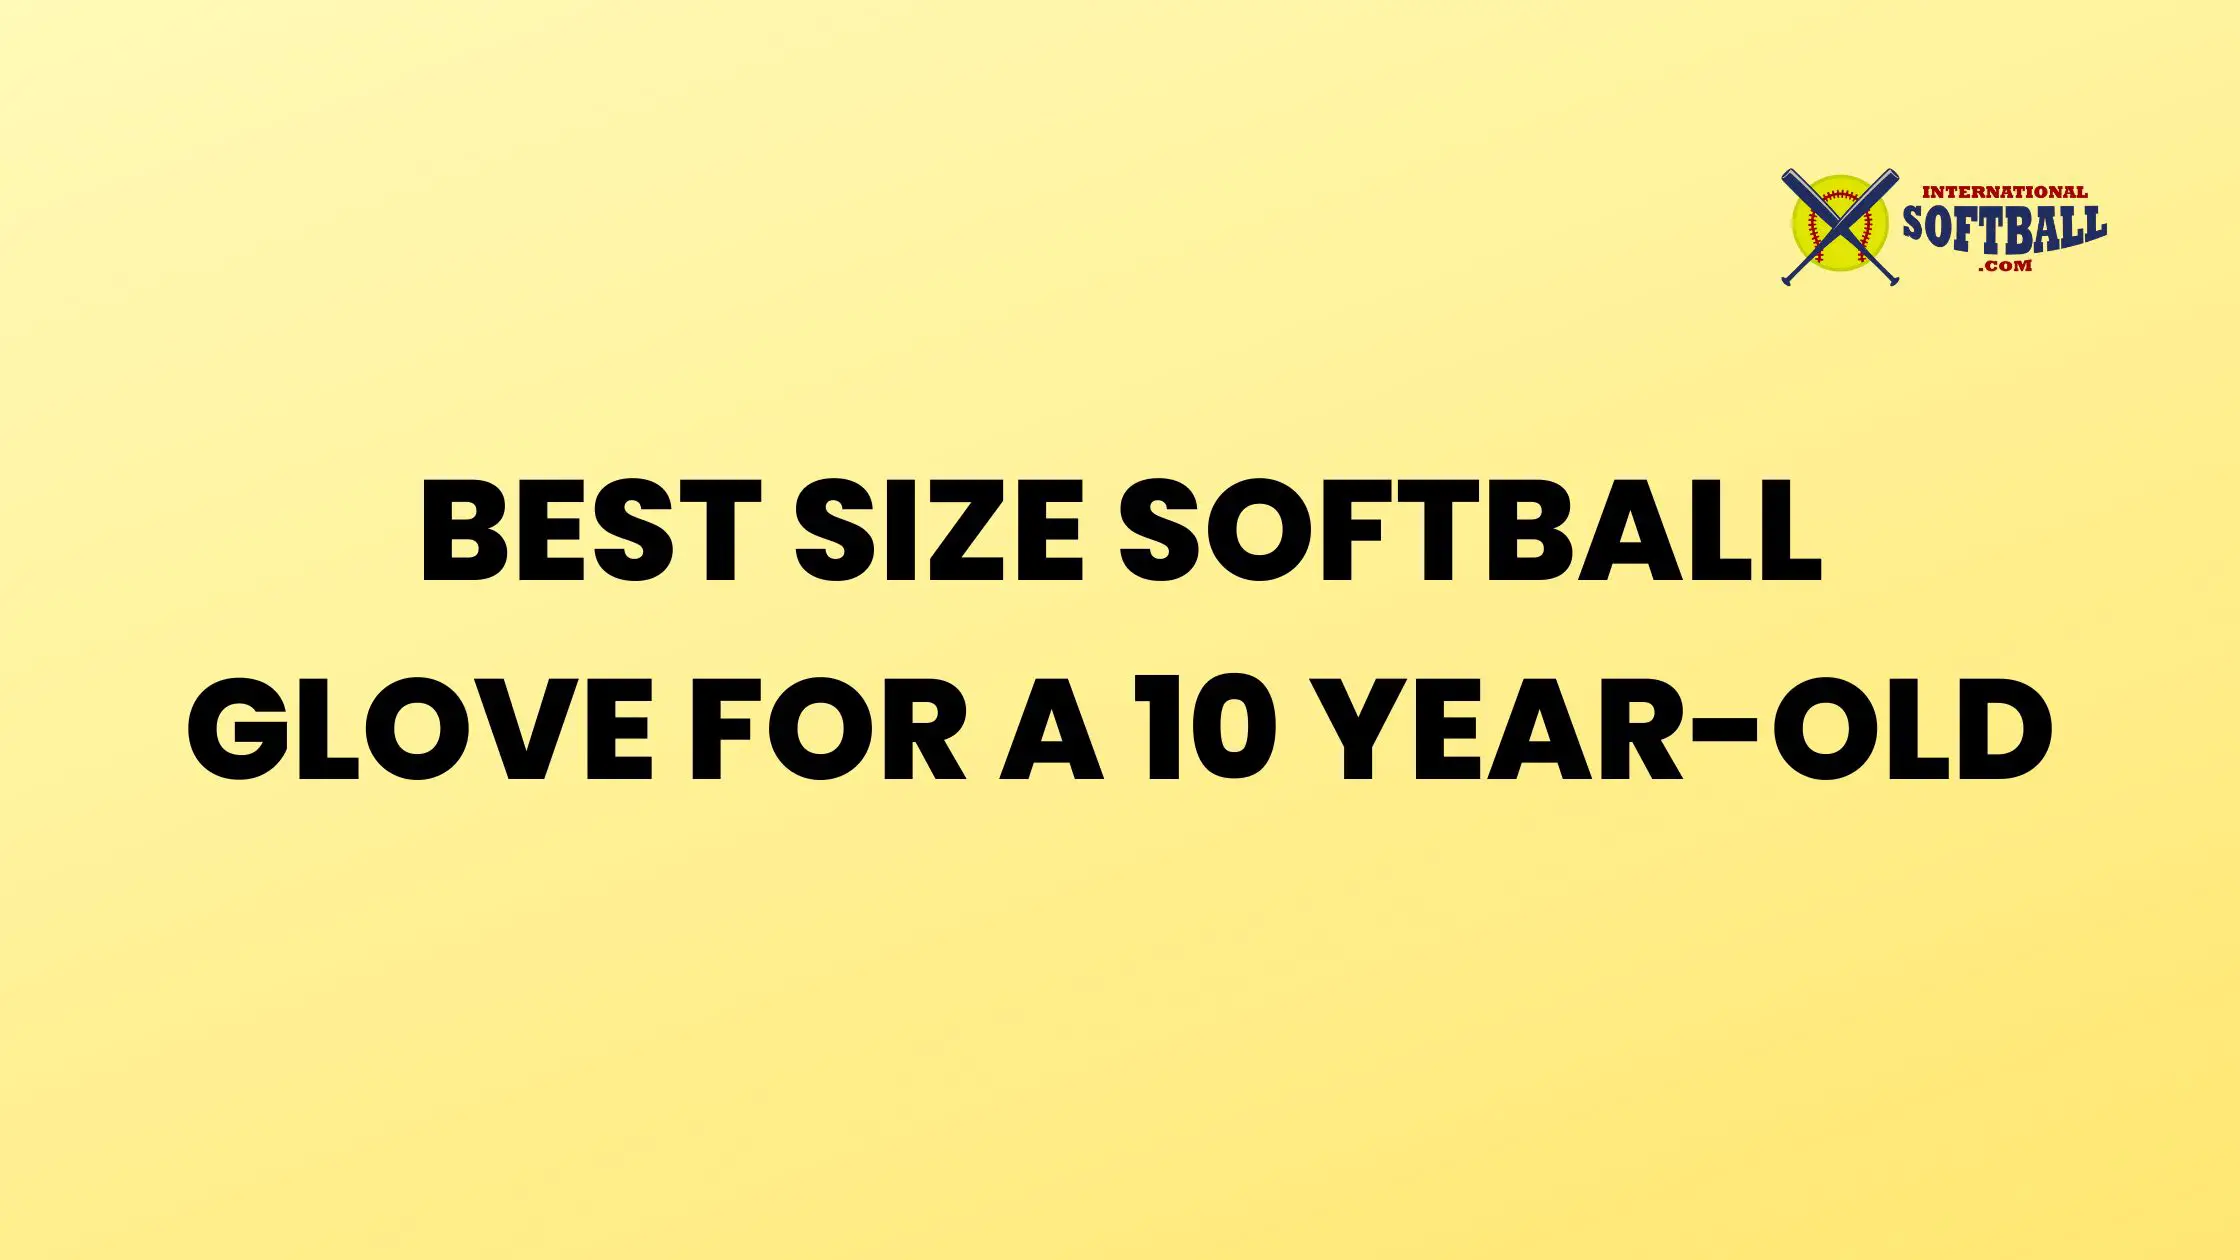 BEST SIZE SOFTBALL GLOVE FOR A 10 YEAR-OLD